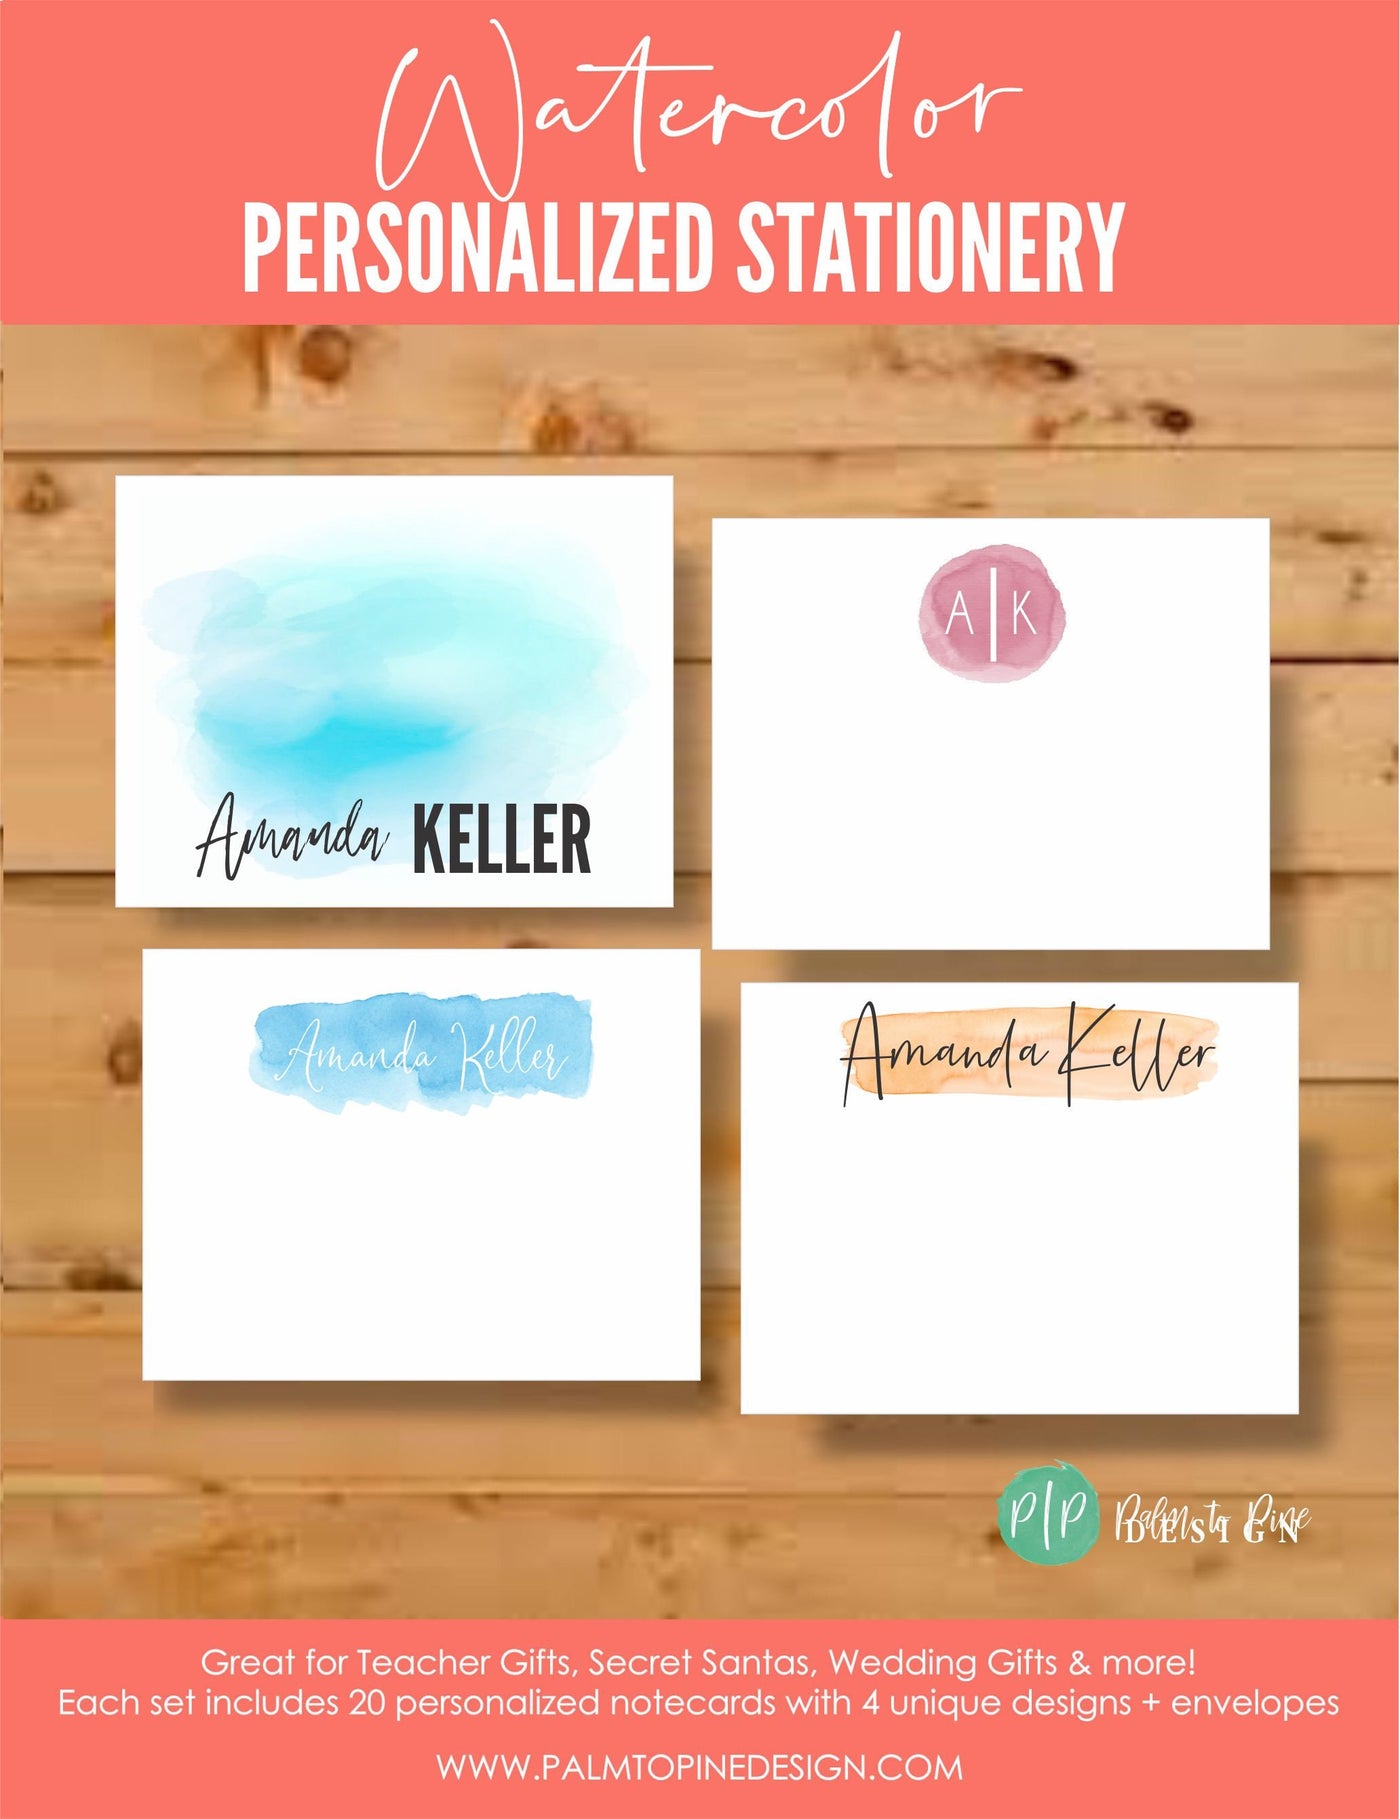 Personalized Stationary, Stationery Cards, Teacher Gift, Stationary Personalized, Stationery Set, Personalized Cards, Personalized Note Card